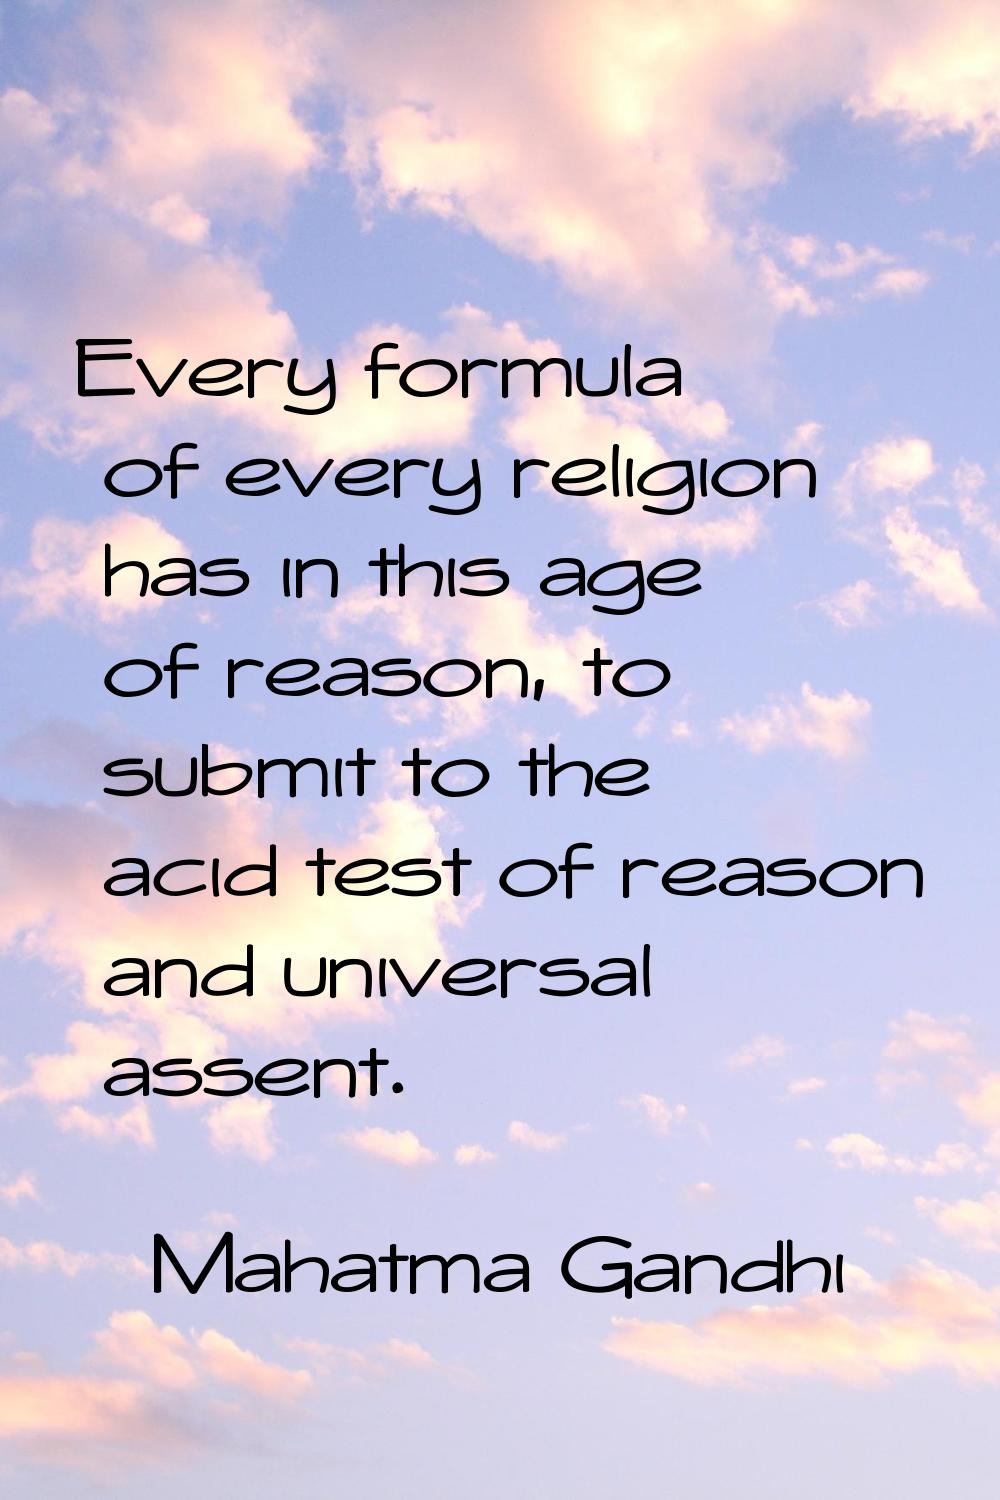 Every formula of every religion has in this age of reason, to submit to the acid test of reason and